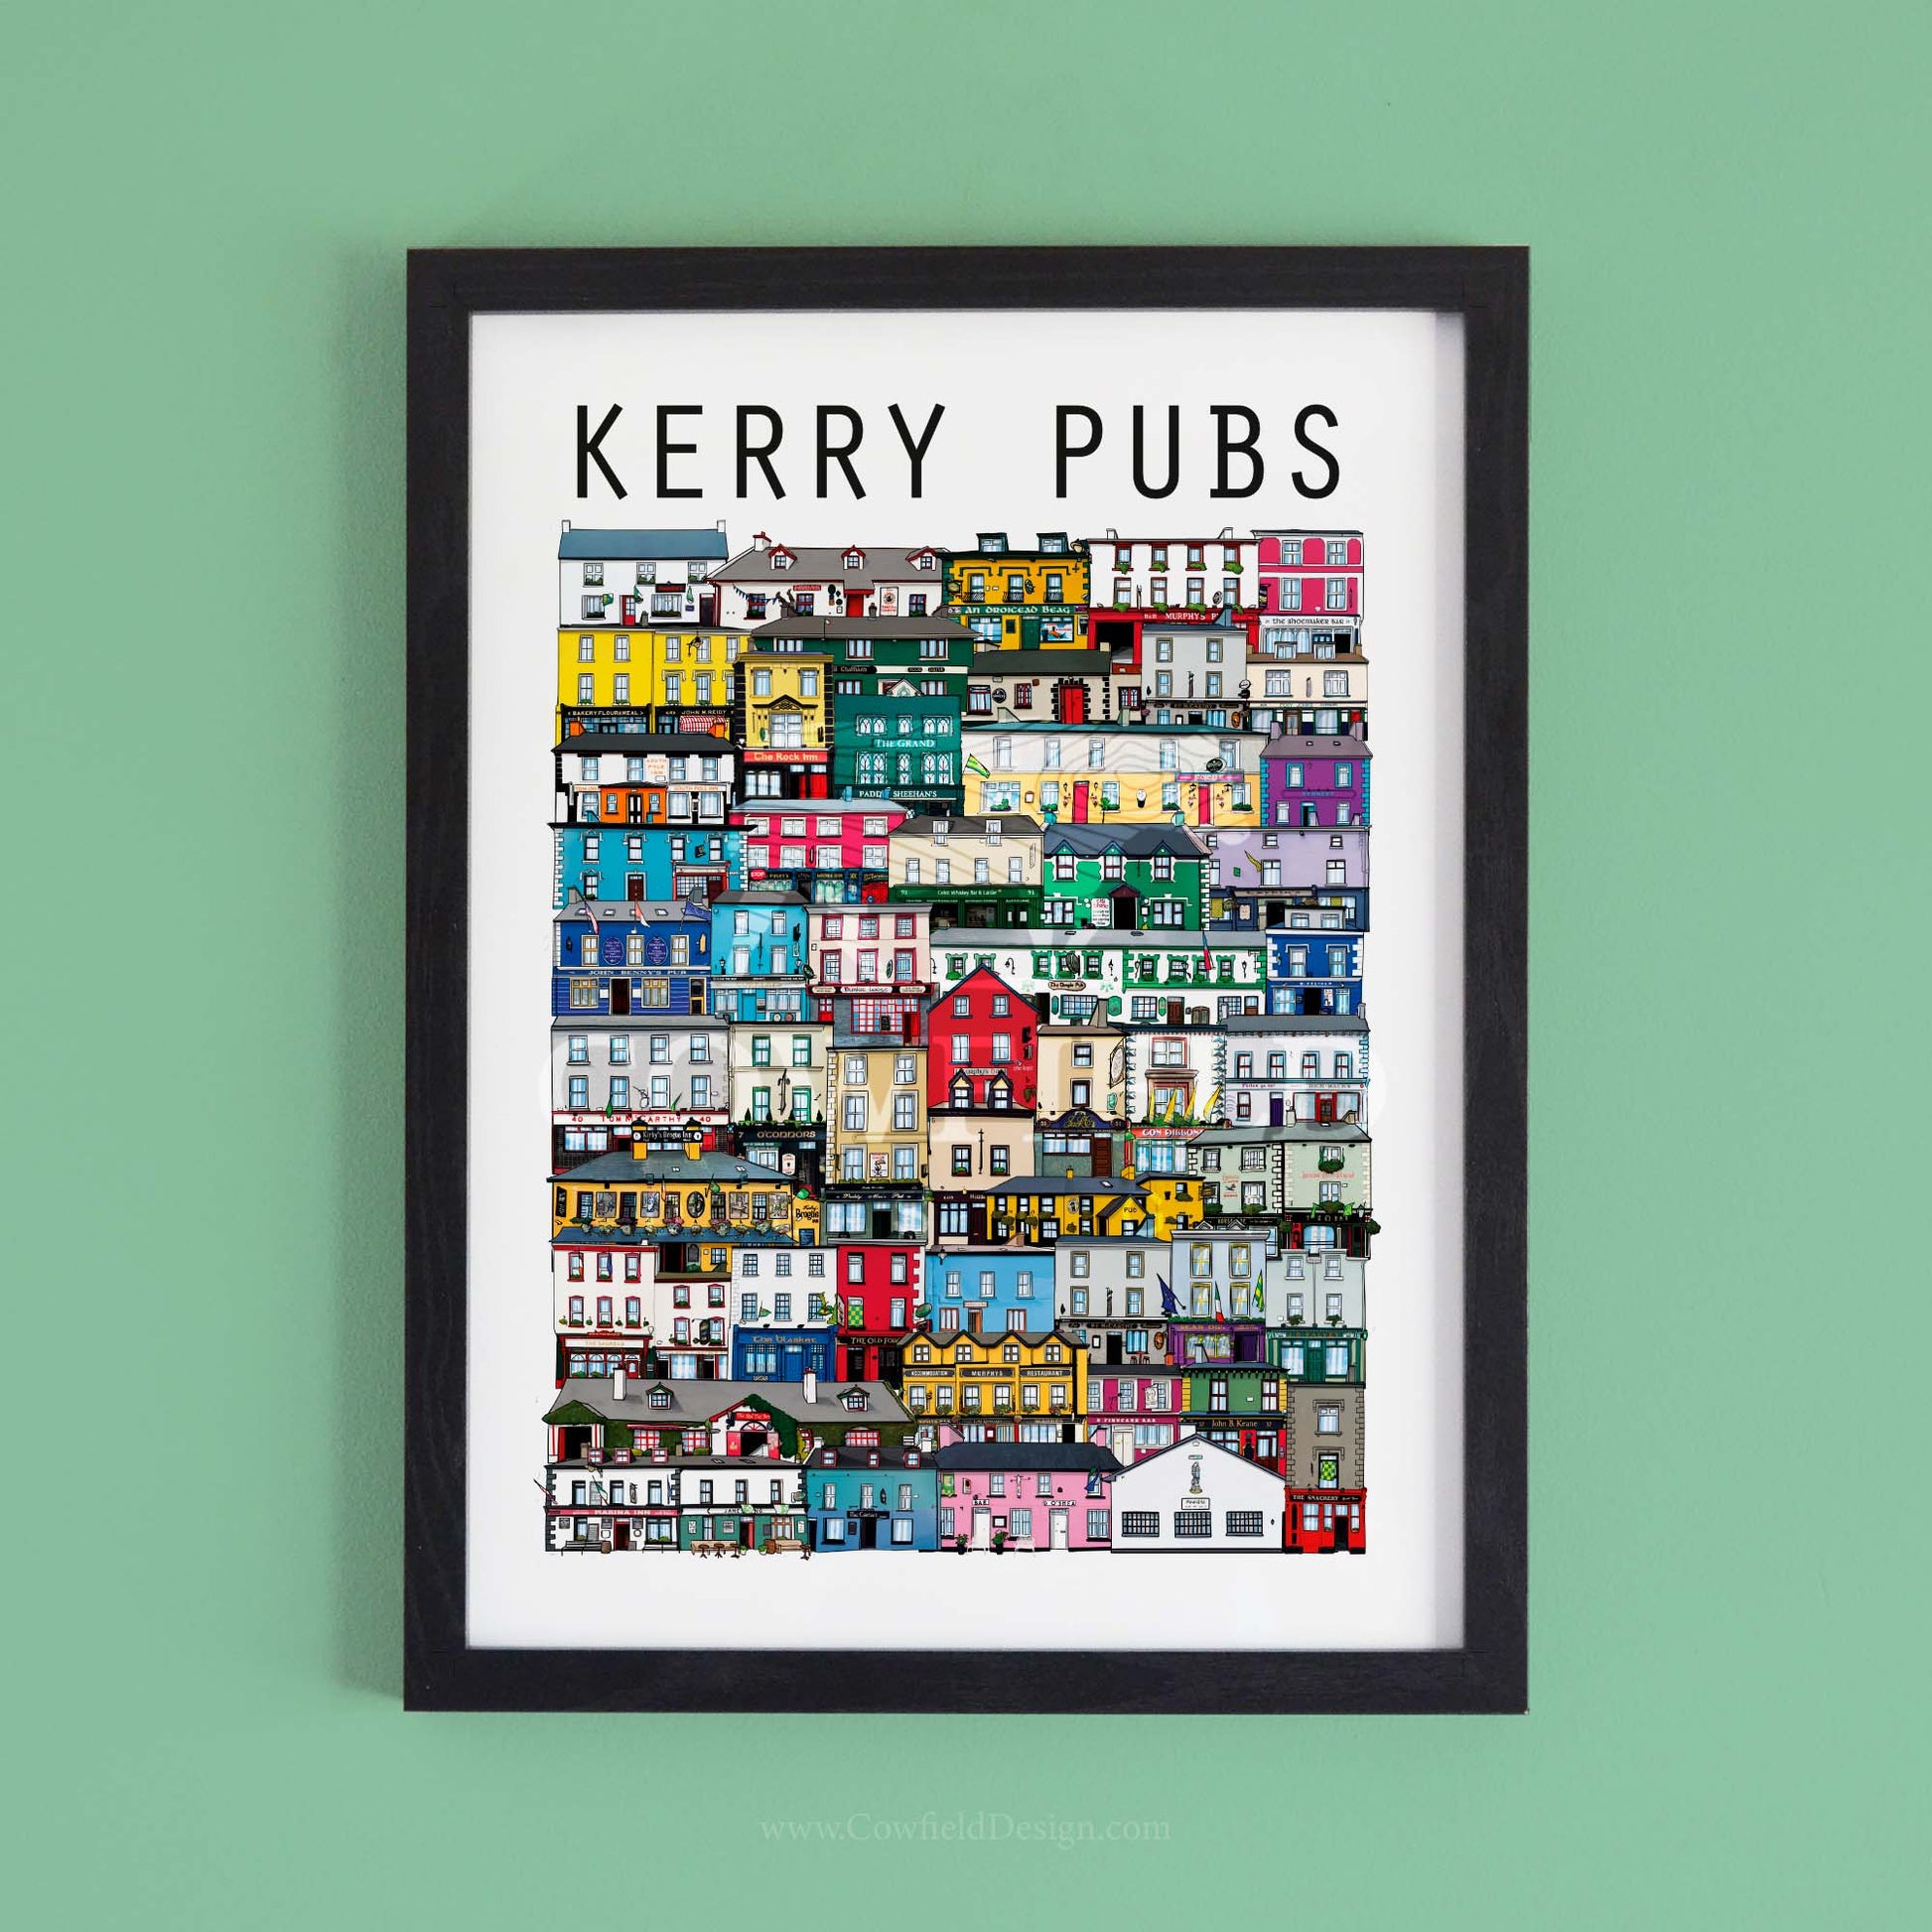 300x400mm Framed Kerry Pubs 1st Edition